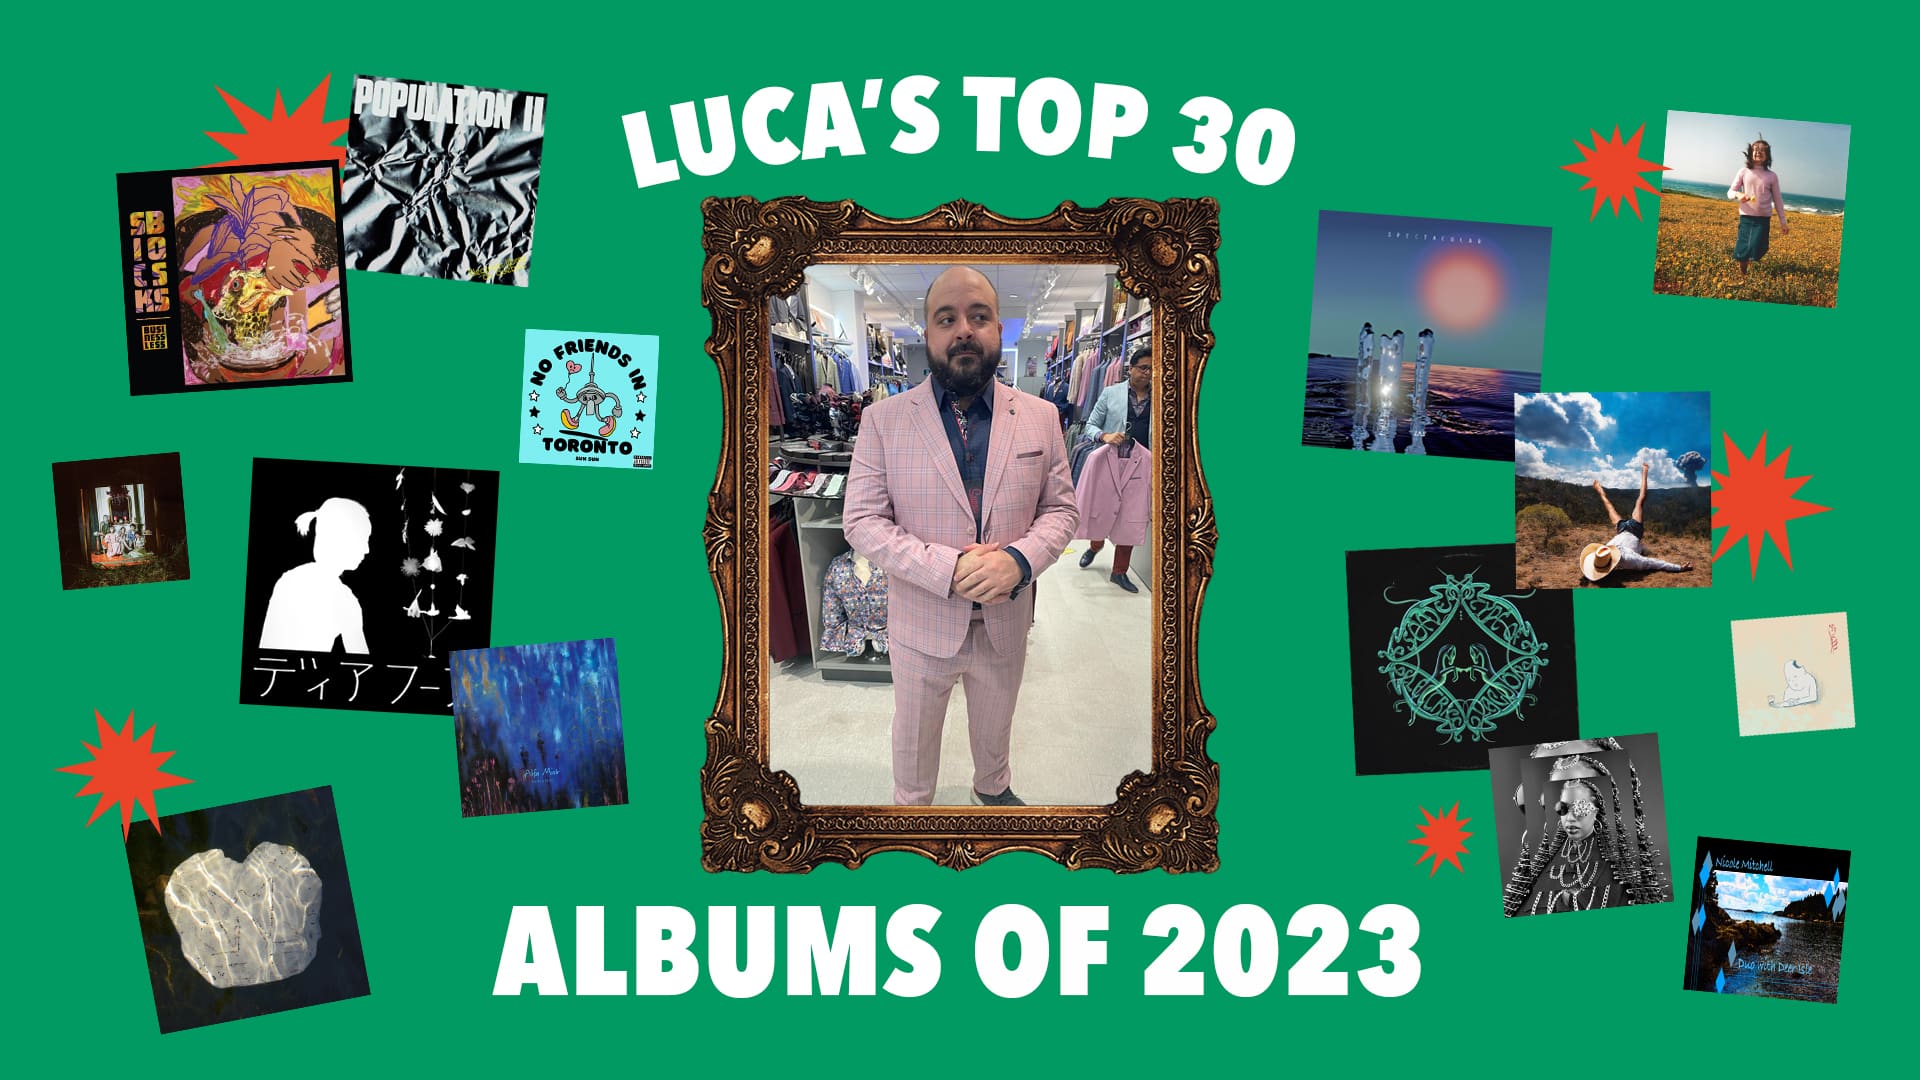 Holiday Top 30 - Luca